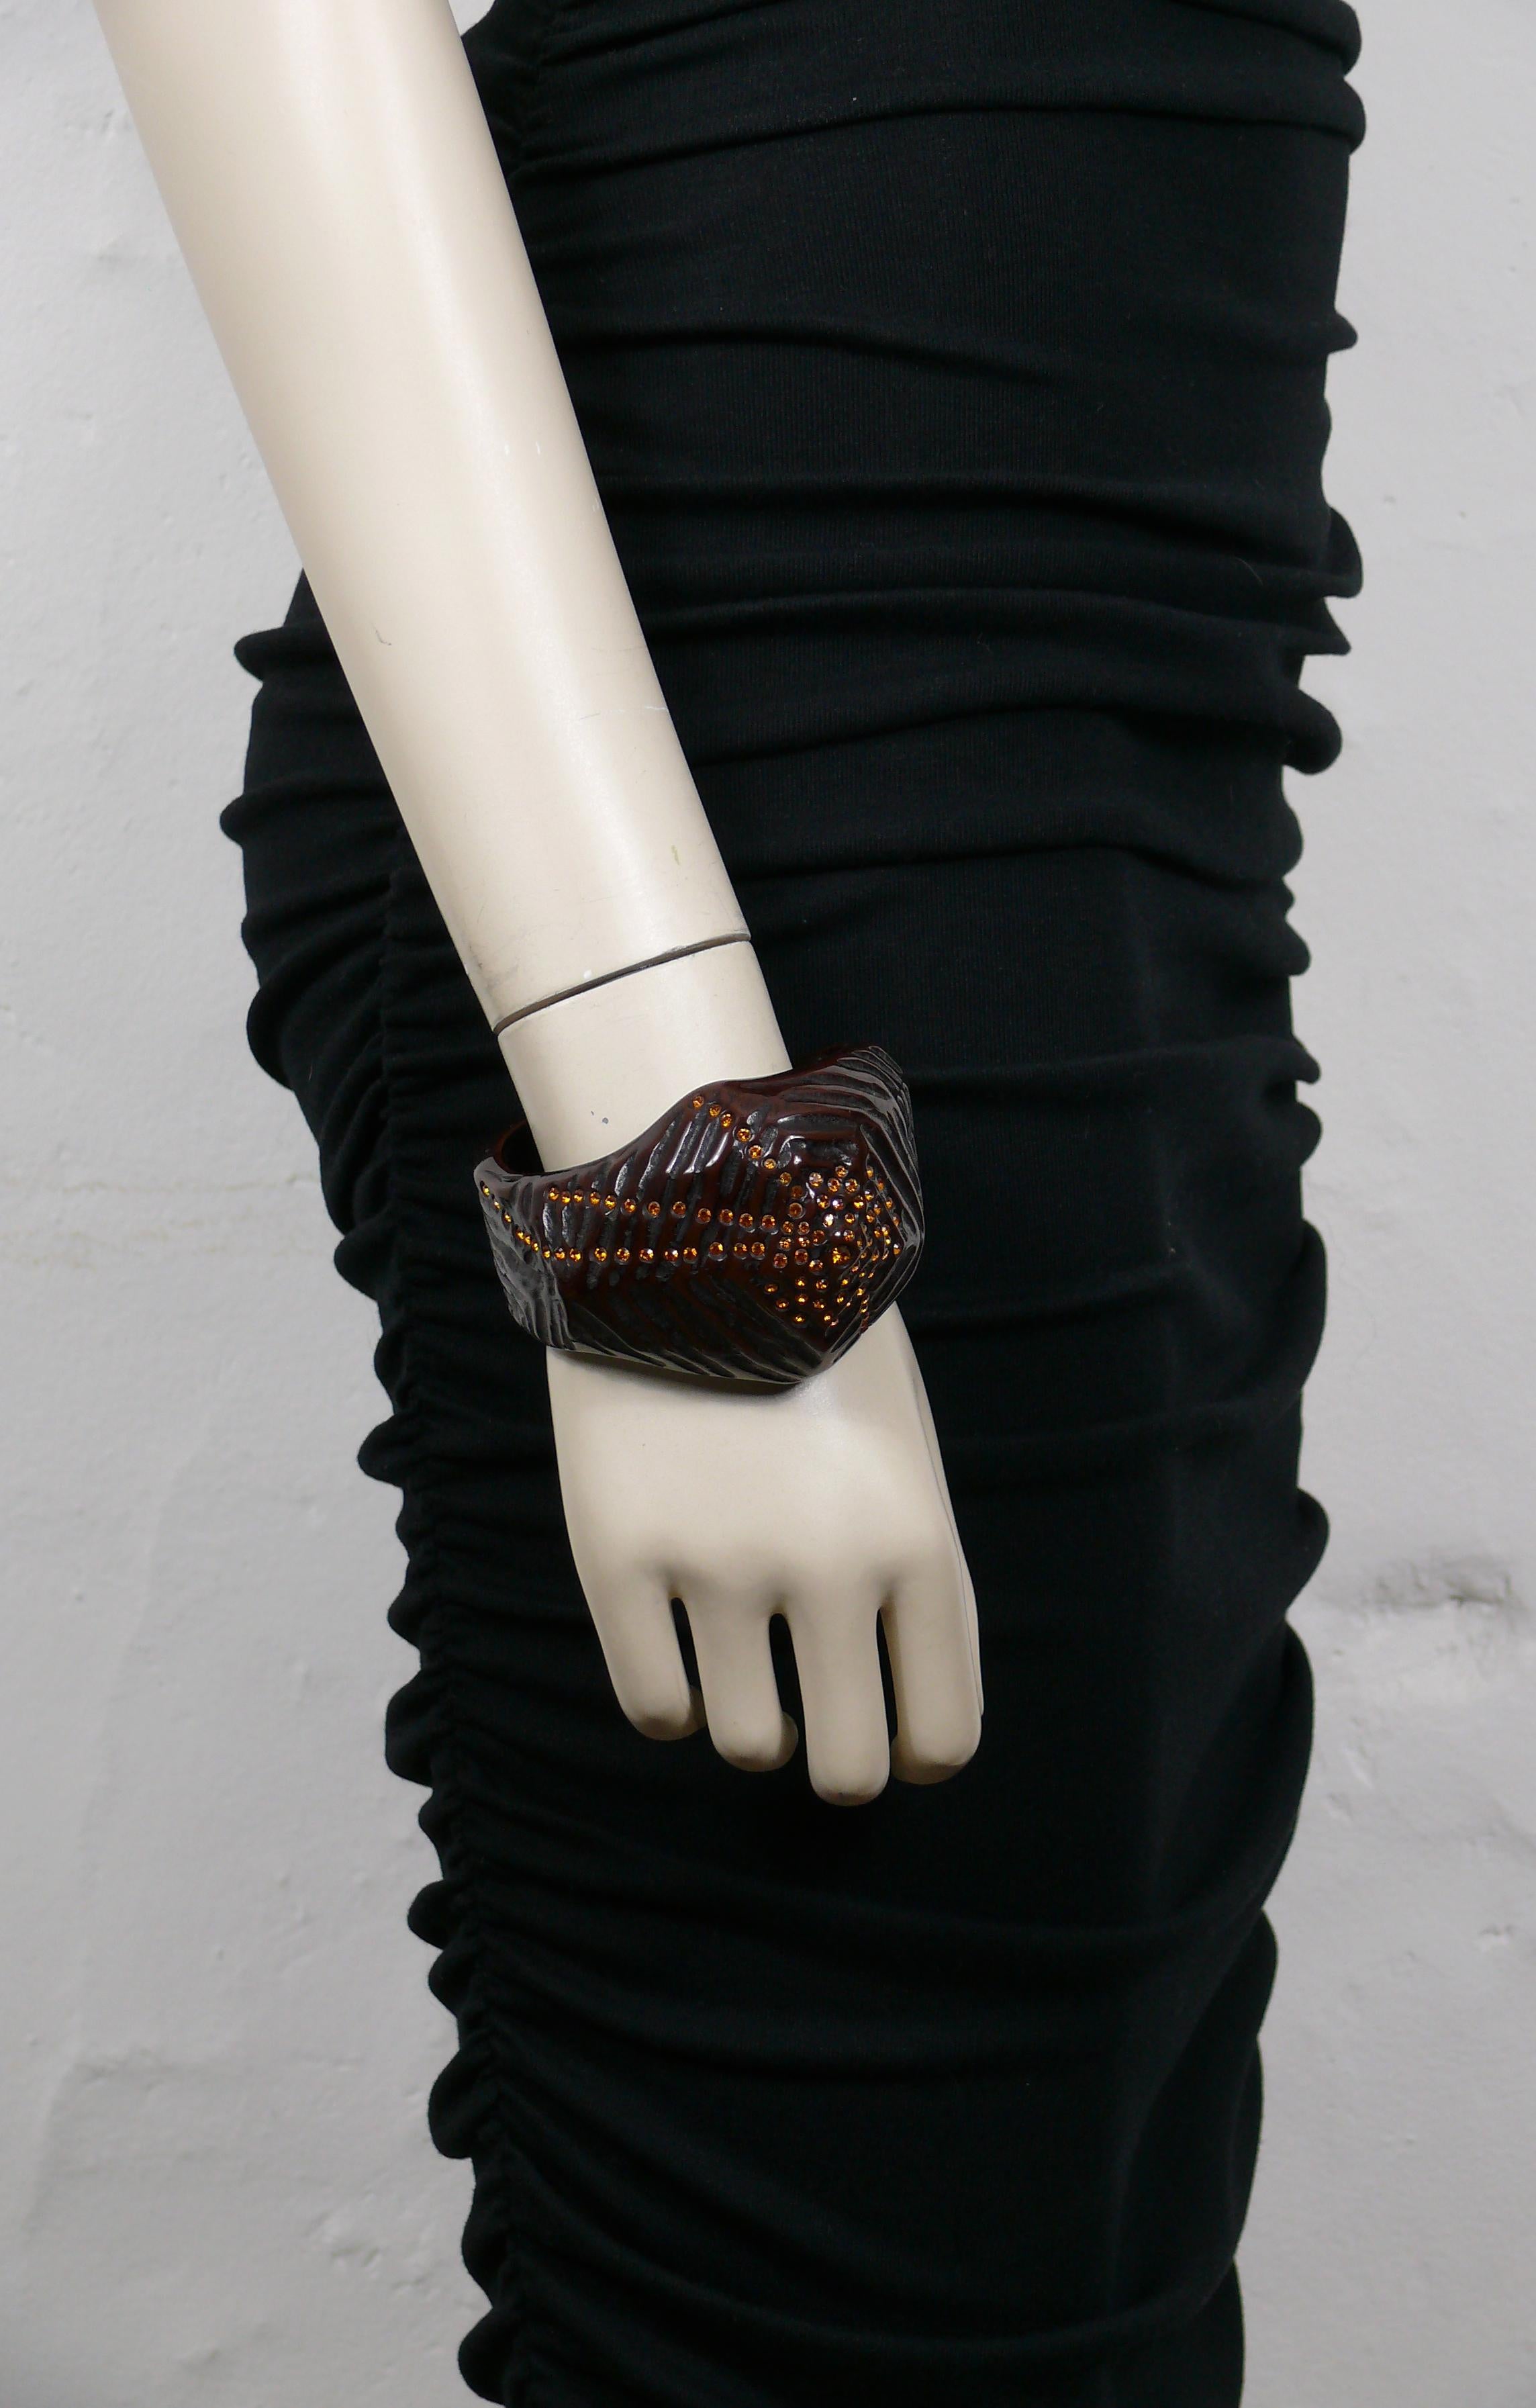 THIERRY MUGLER vintage rare textured brown resin asymetric cuff bracelet embellished with orange colour crystals.

Embossed TM.

Comes from a French private THIERRY MUGLER jewelry collection.

Indicative measurements : inner circumference approx.